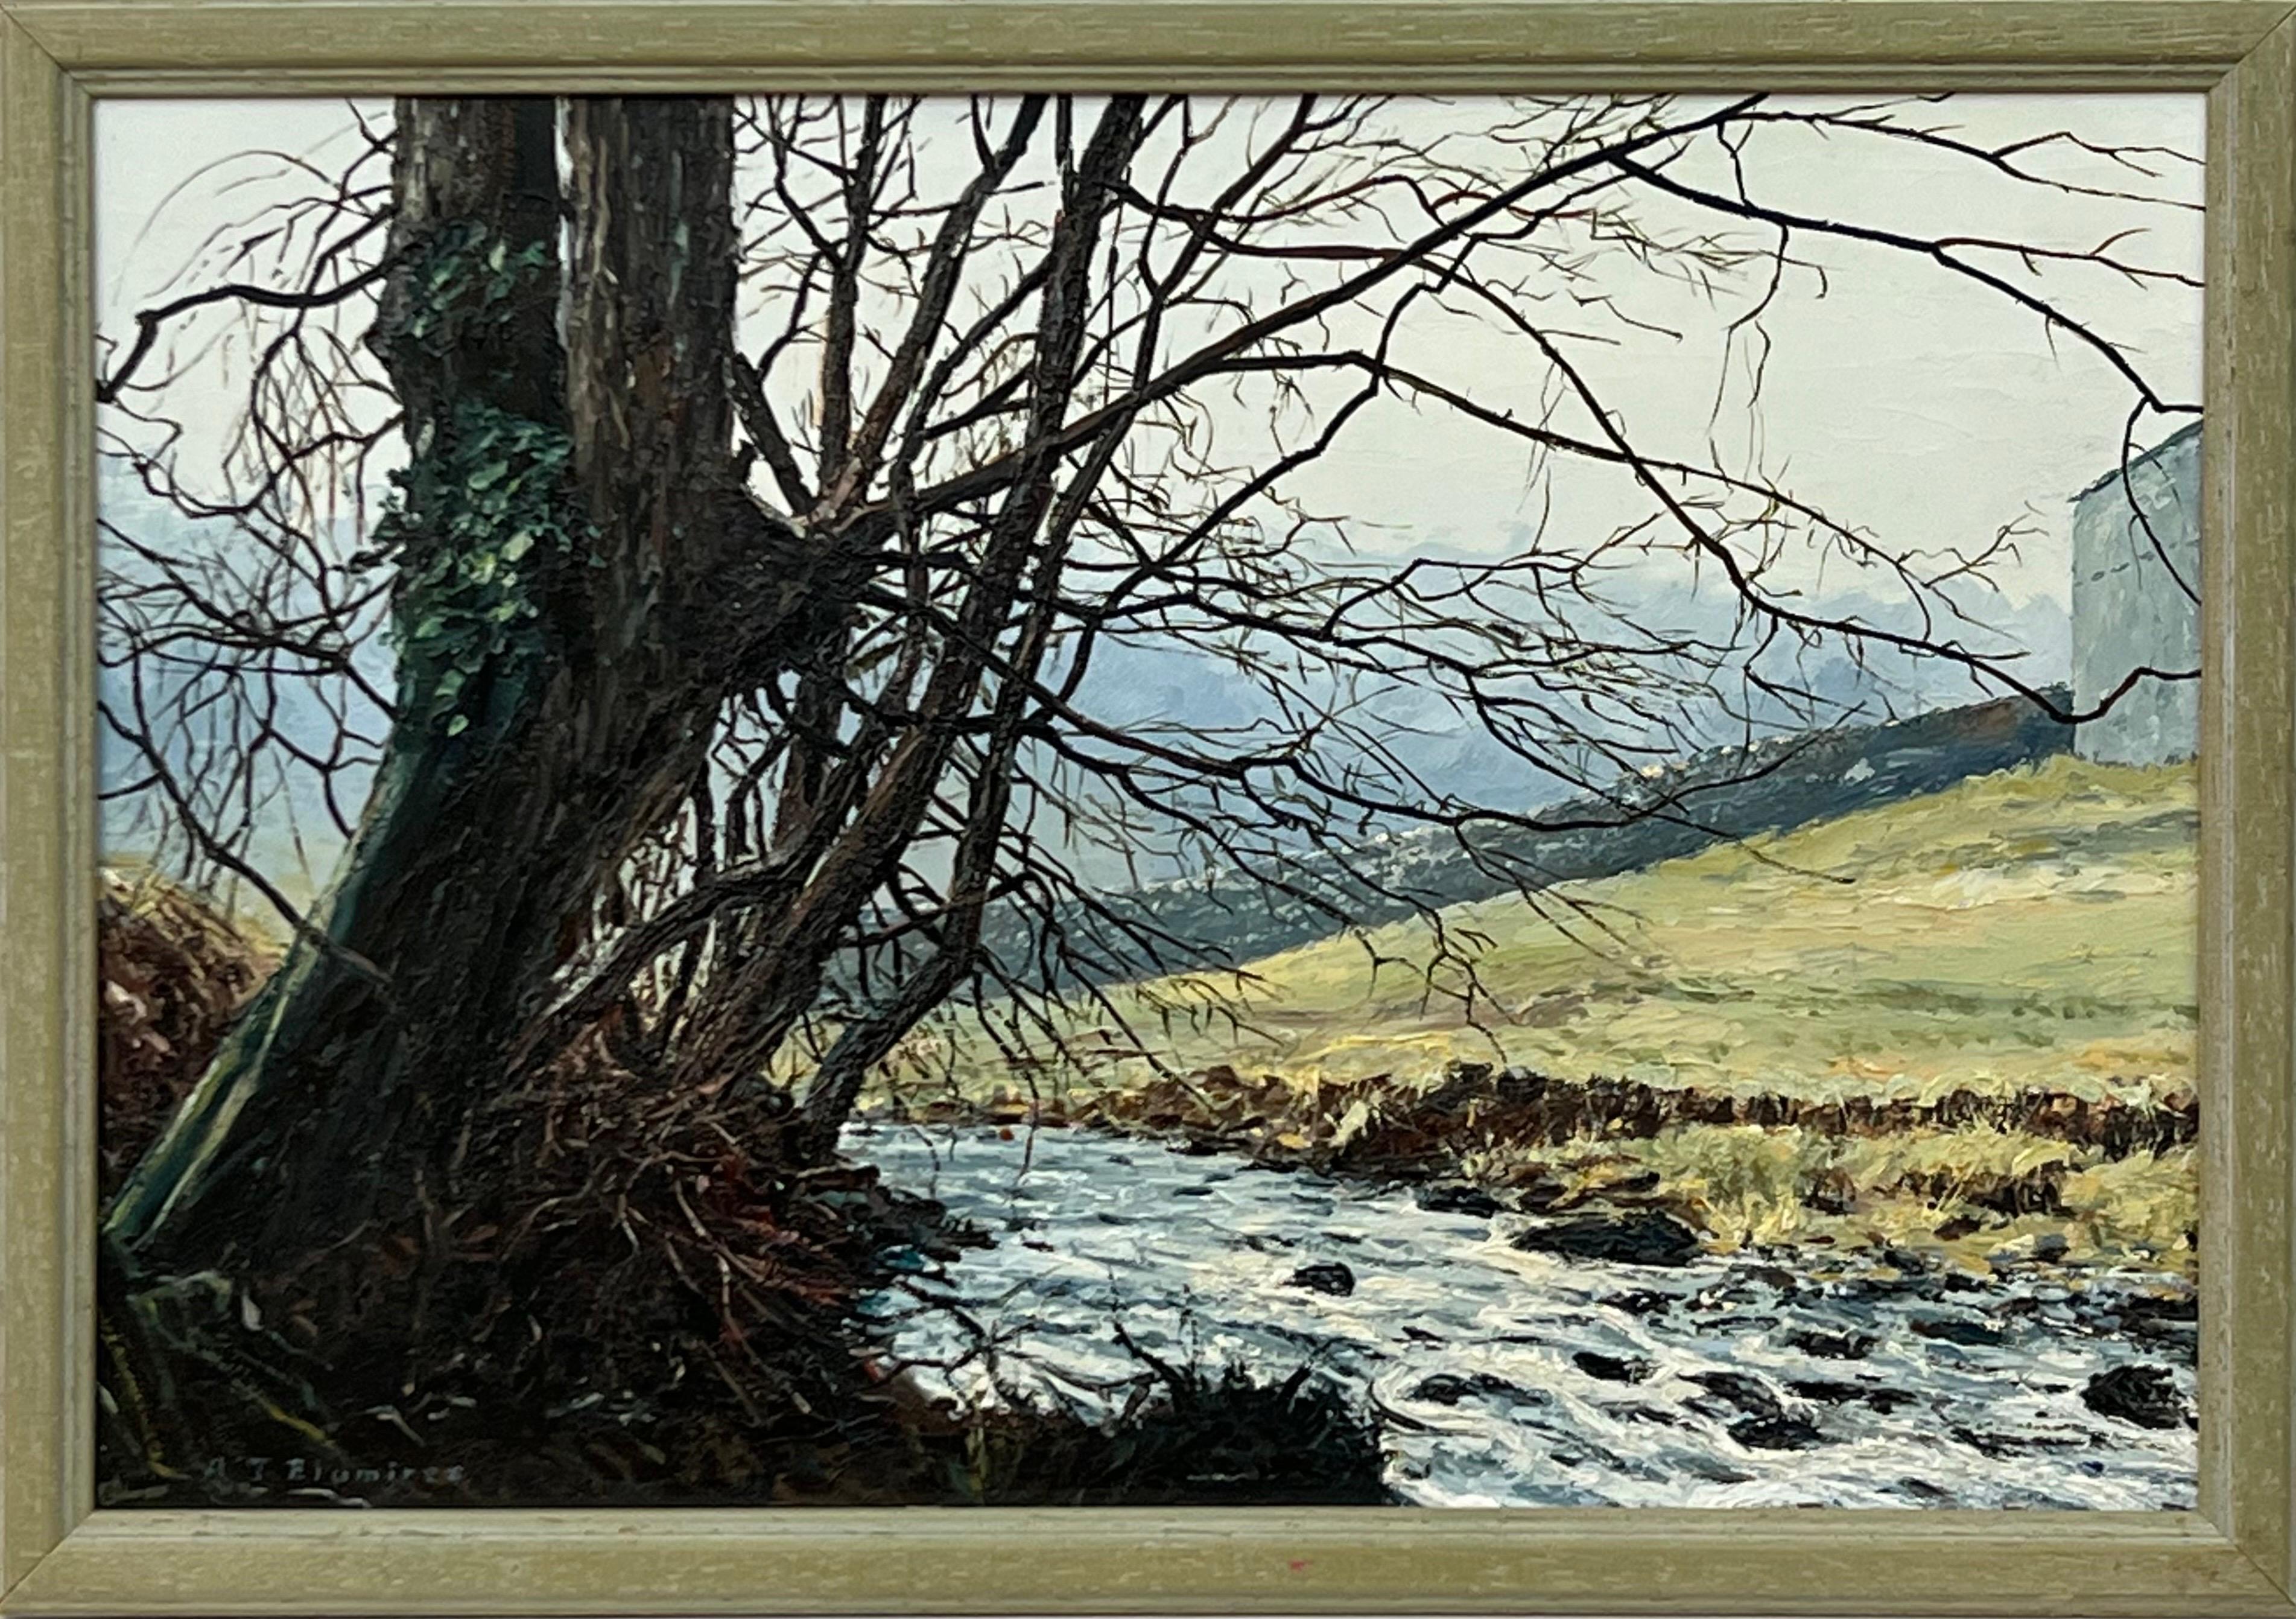 Oil Painting of Tree over a River in Yorkshire Dales by British Landscape Artist